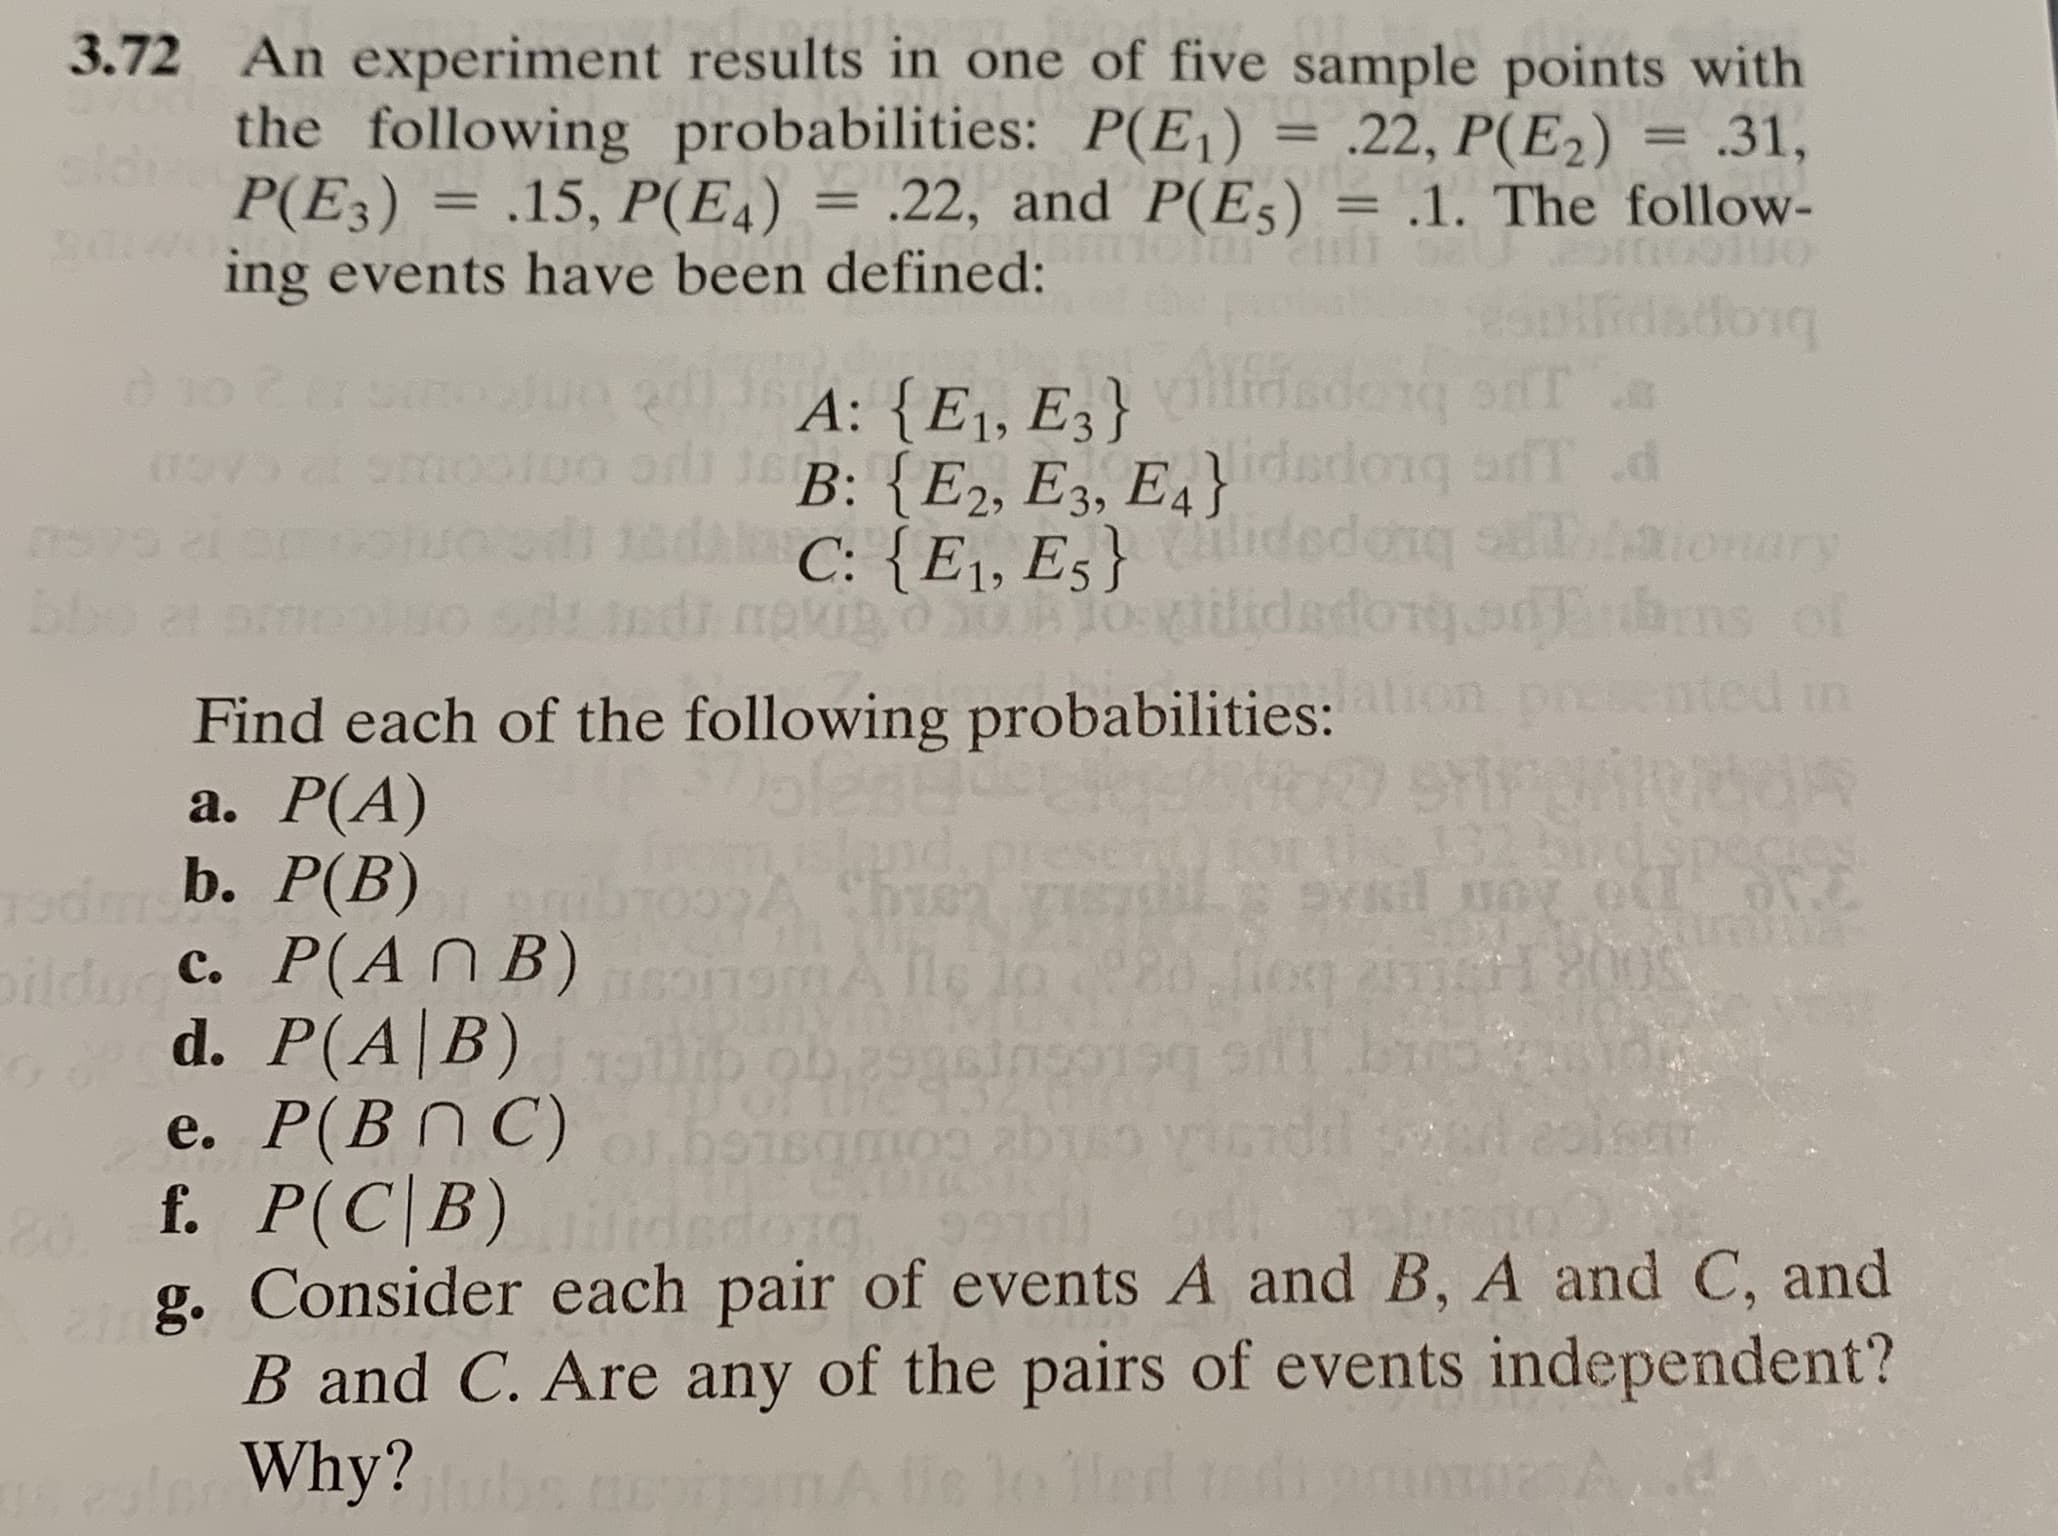 2 An experiment results in one of five sample points with
the following probabilities: P(E¡) = .22, P(E2)
P(E3) = .15, P(E4) =
ing events have been defined:
.31,
.22, and P(E5) = .1. The follow-
%3D
%3D
%3D
brops
rdadorq
A: {E1, E3}
B: {E2, E3, E4} dedong afT d
C: {E\, Es}idedenq aionary
ms of
on presented in
lodong
Find each of the following probabilities:
a. Р(А)
b. P(B) ibTOA Shren e
c. P(A NB)somA lle jo 80 fiog 2erl00S
d. P(A|B) b ob 29gaingoi9 b p
e. P(B N C) o.bo1samos abu
f. P(C|B) idedorg9
g. Consider each pair of events A and B, A and C, and
B and C. Are any of the pairs of events independent?
Why?
SY
romisland
32bird.species
